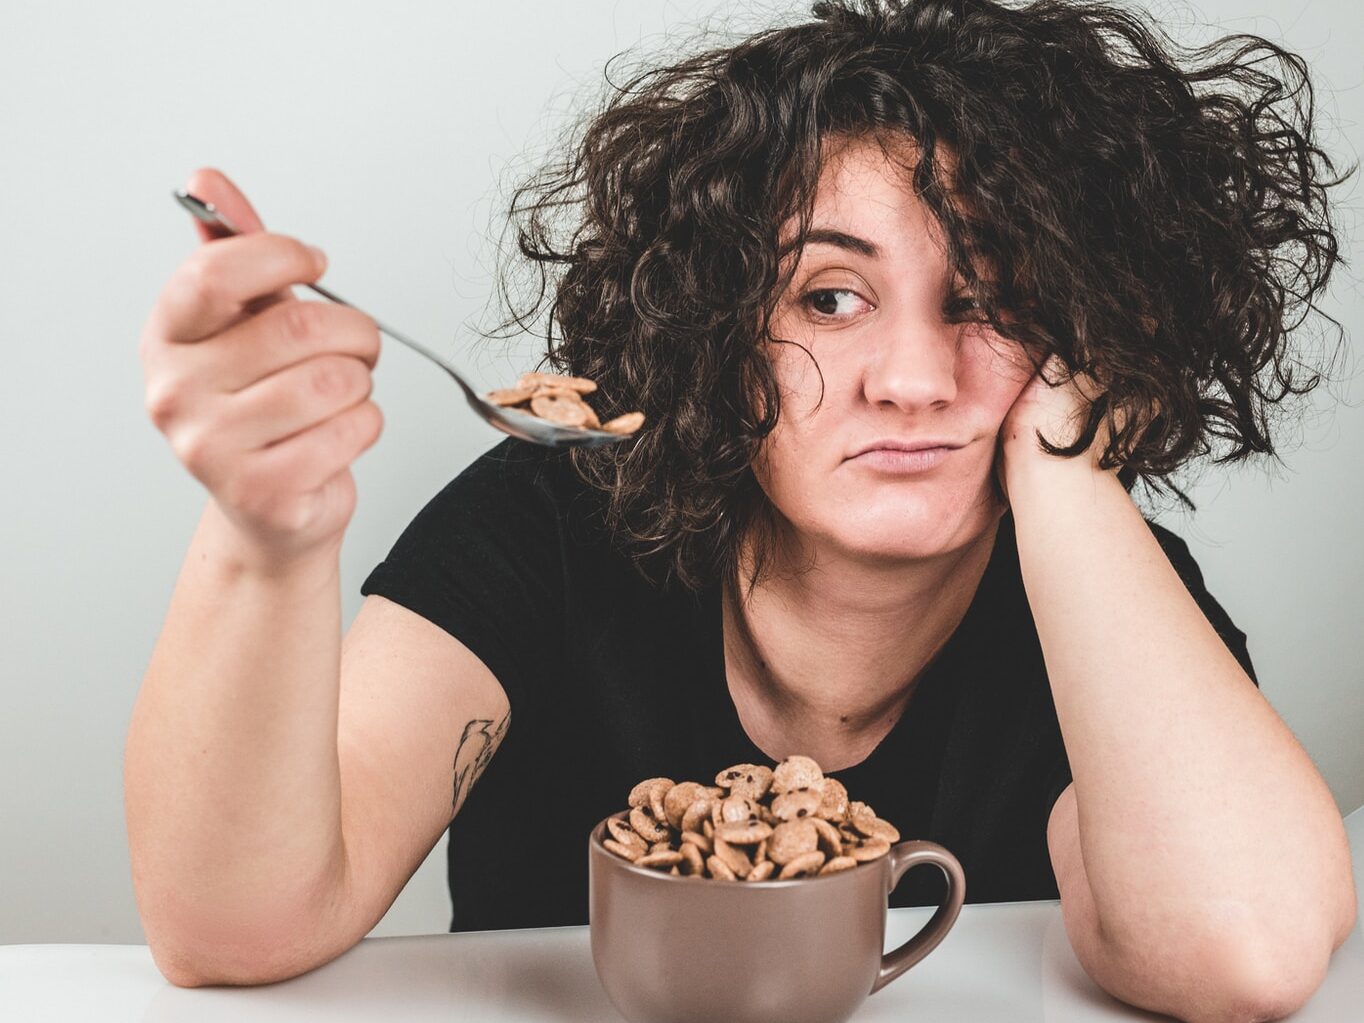 woman with messy hair wearing black crew-neck t-shirt holding spoon with cereals on top